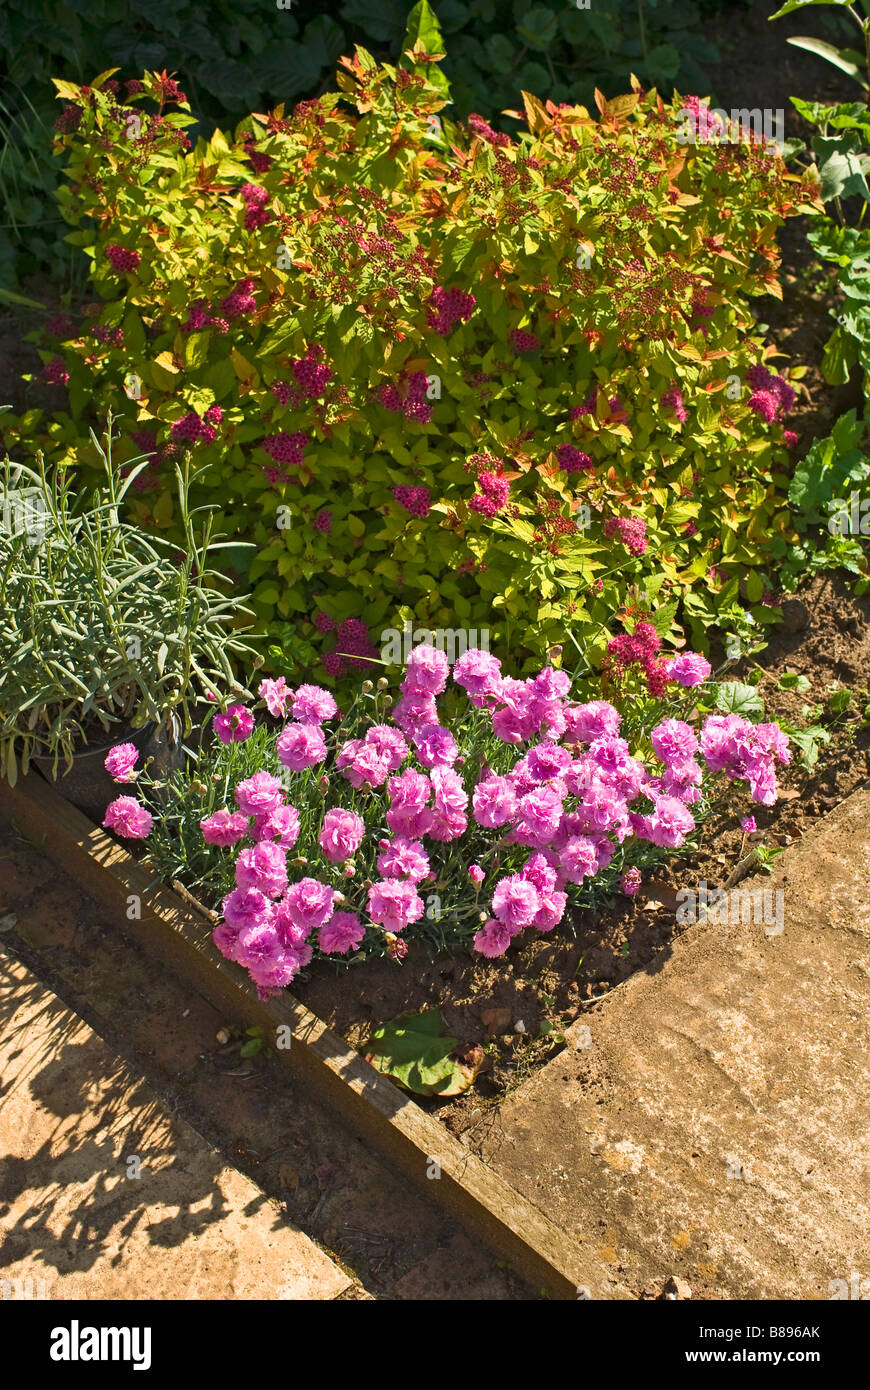 Dianthus Whatfield Can Can makes a striking early summer display at the edge of a small flower garden Stock Photo